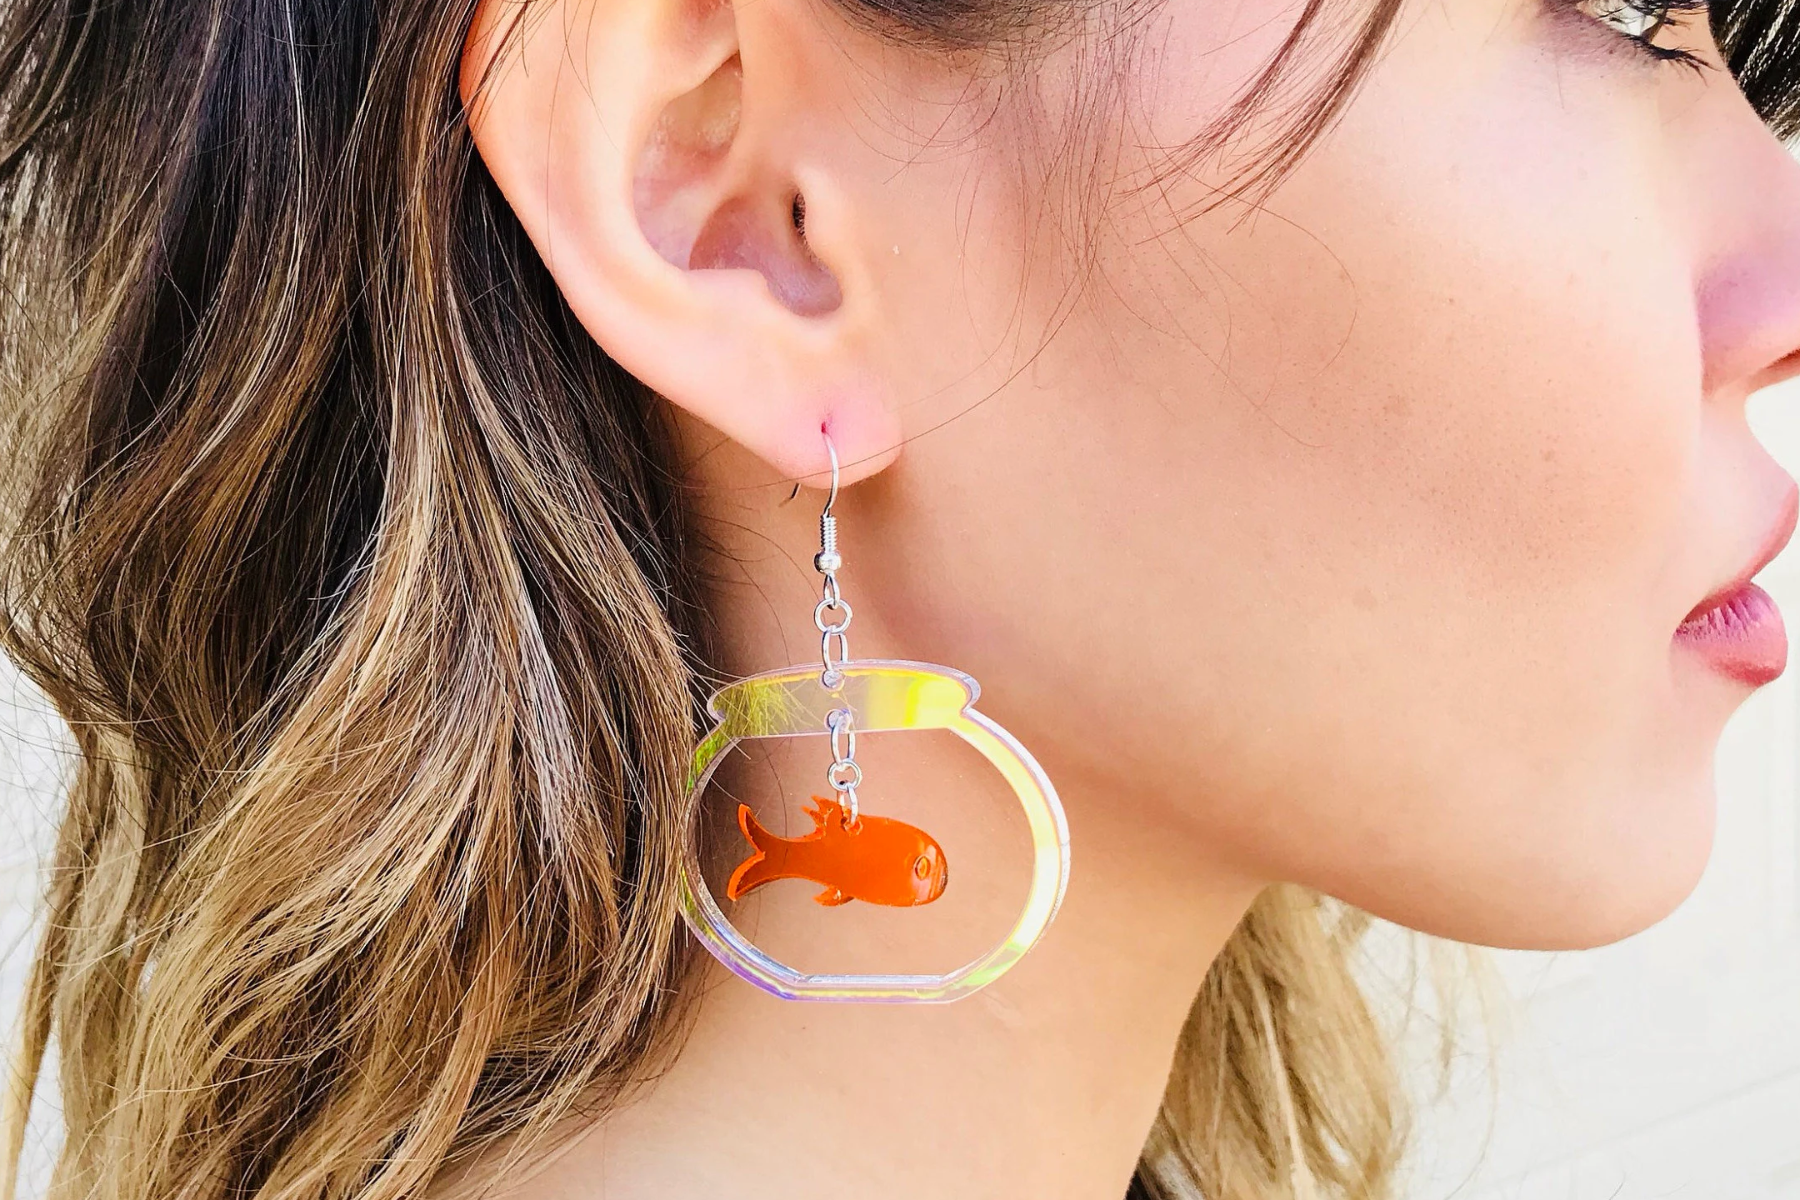 Acrylic Earrings - Elevate Your Style With This Gorgeous Jewelry